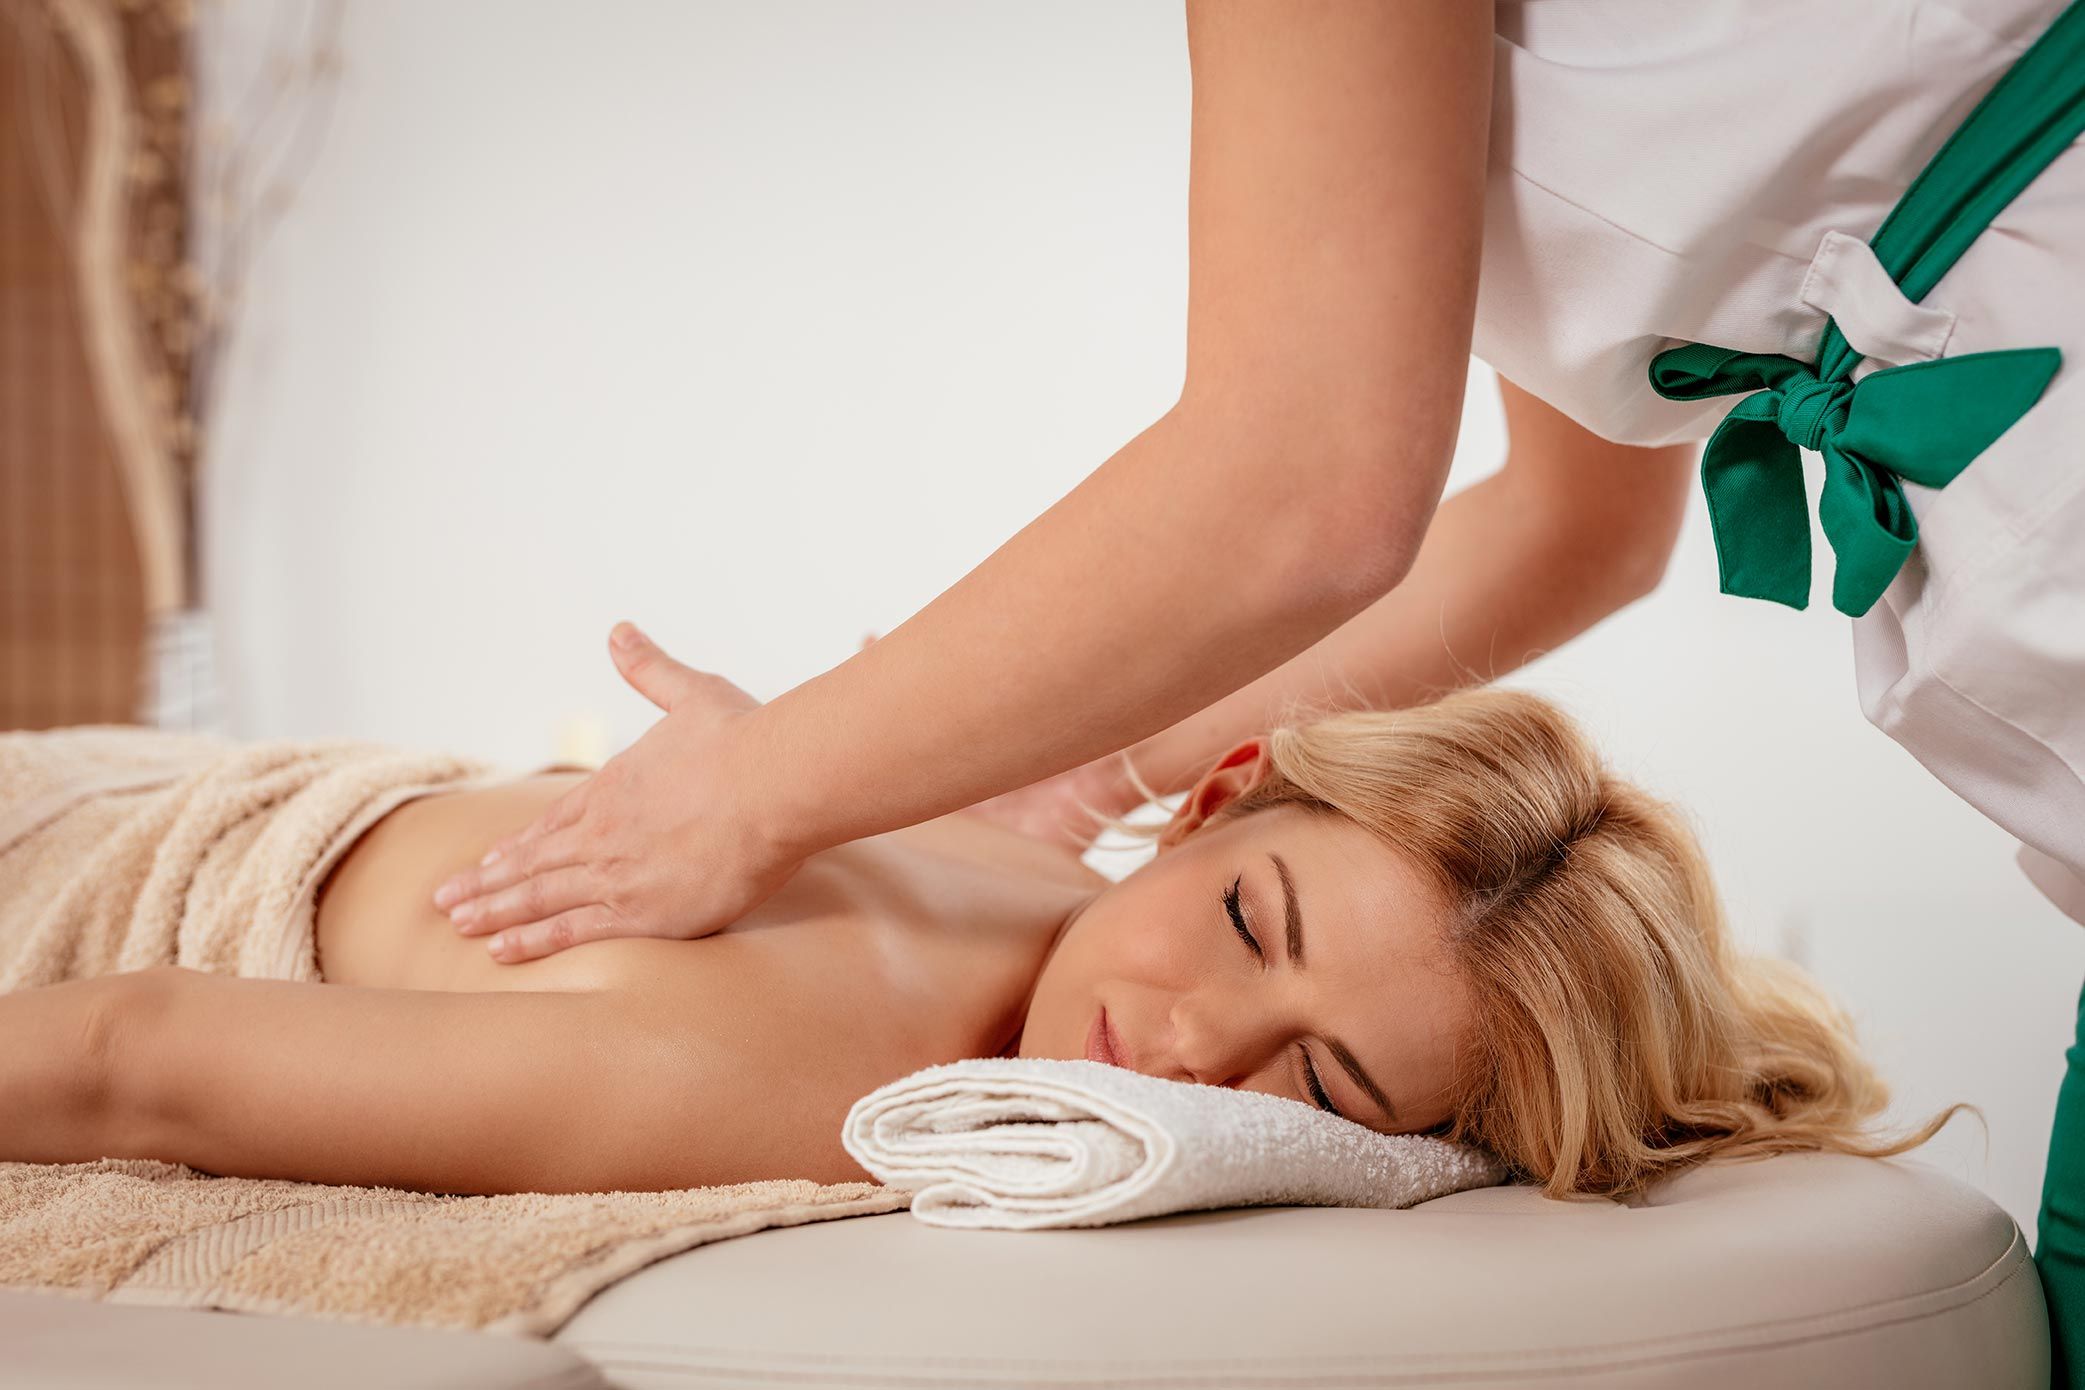 Aristocracy Salon & Day Spa offers massage therapy services in downtown Plymouth, MA